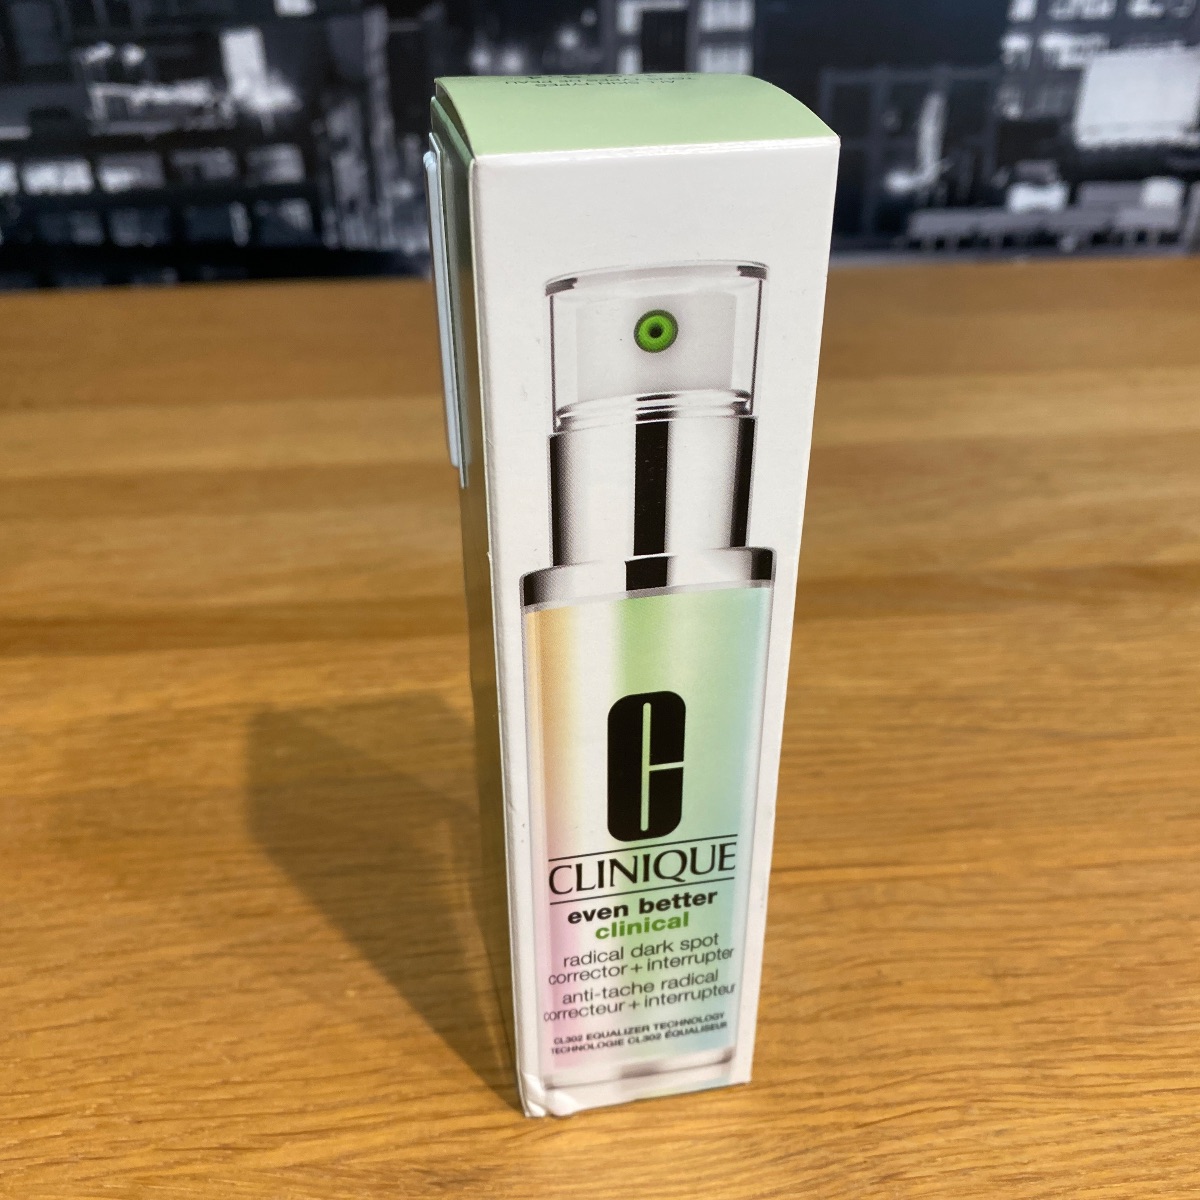 Clinique Even Better Clinical Radical Dark Spot Corrector And Interrupter 50ml BALMS AND TREATMENTS 192333027226 (Brand New)